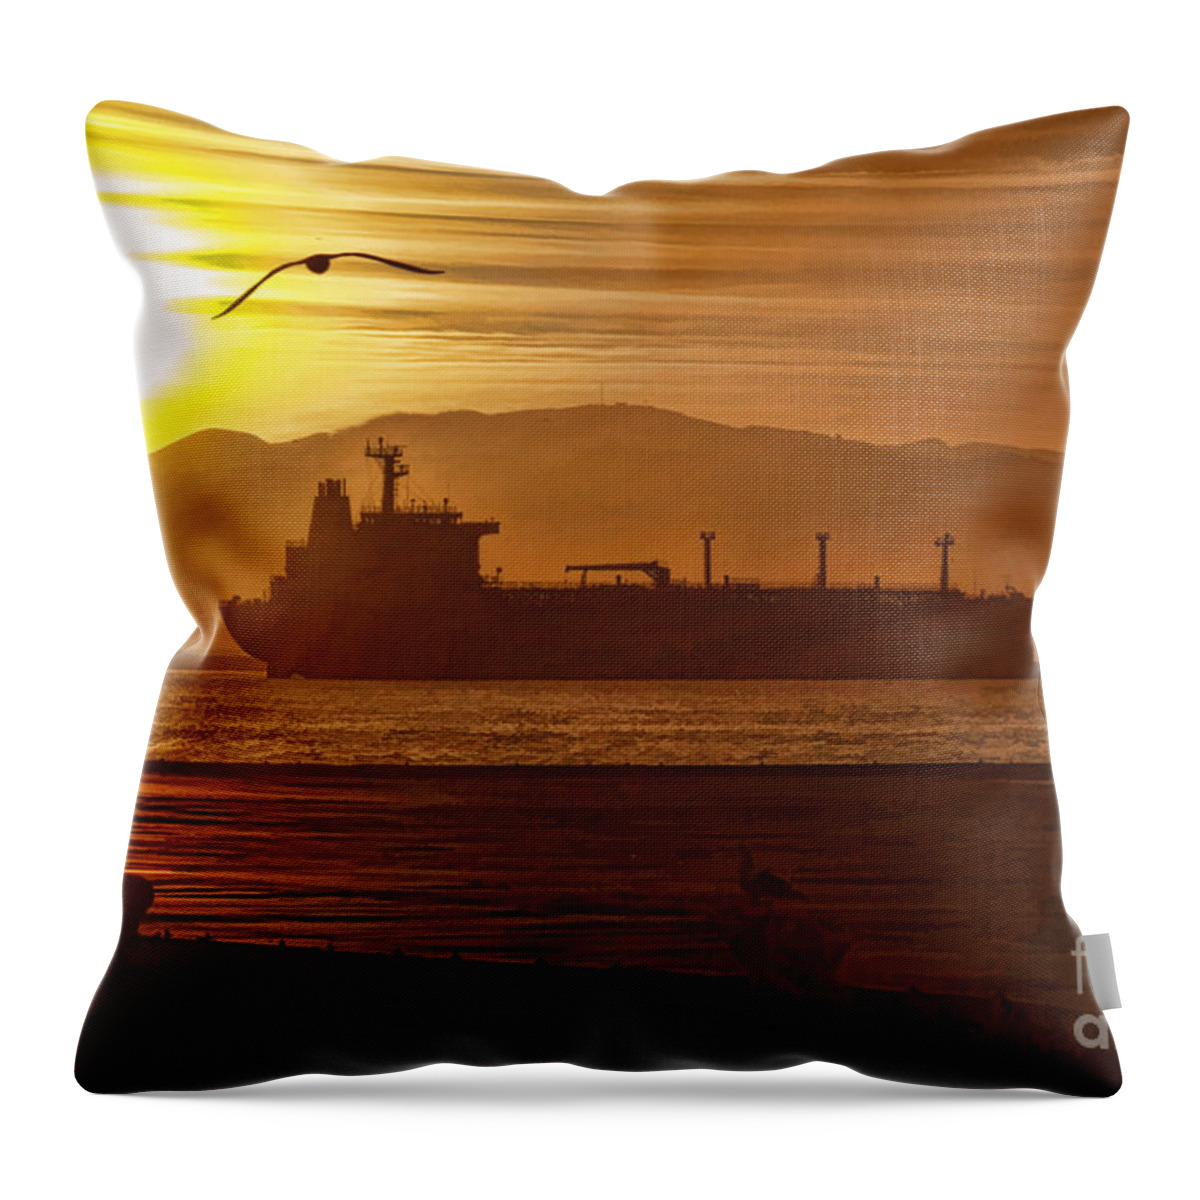 Tanker Sunrise Throw Pillow featuring the photograph Sunrise Over Tanker by Blake Richards